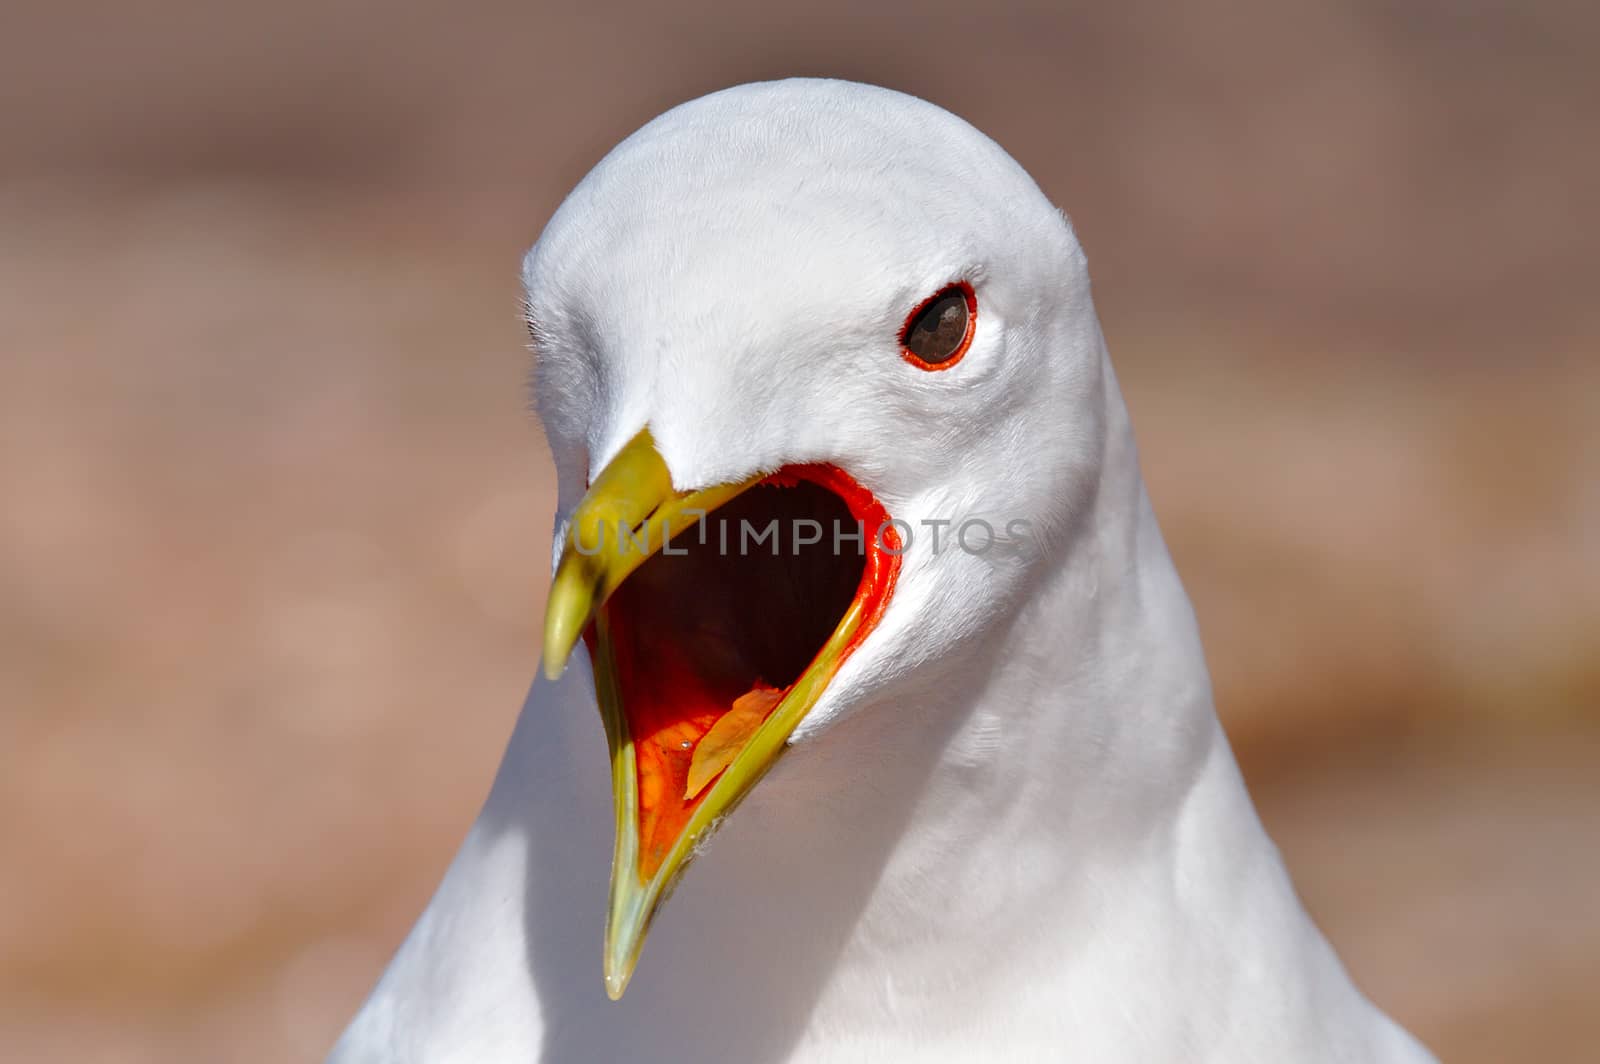 Closeup of white gull screaming mouth open. Tongue visible.